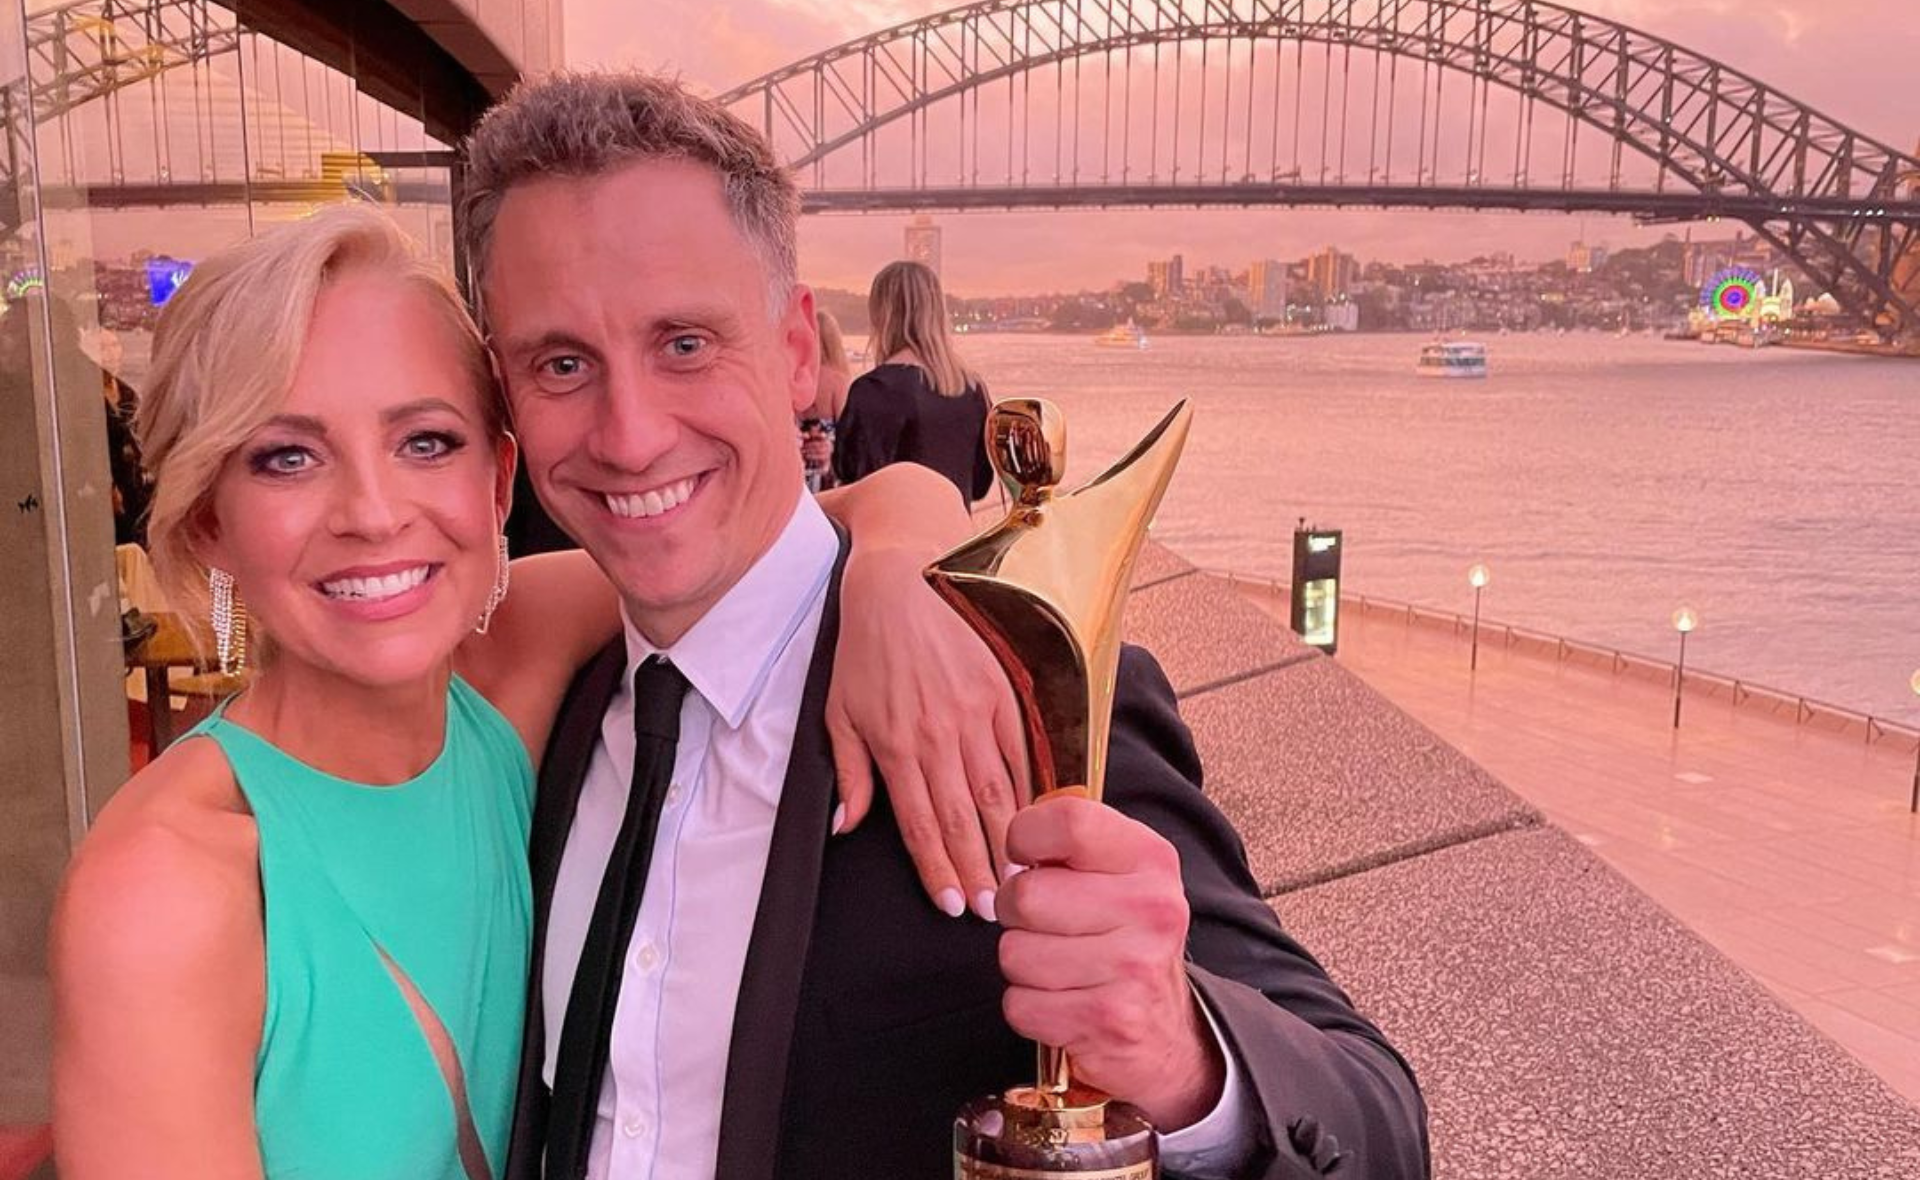 Carrie Bickmore’s ex Chris Walker allegedly ‘hurting’ after reports spread involving Tommy Little